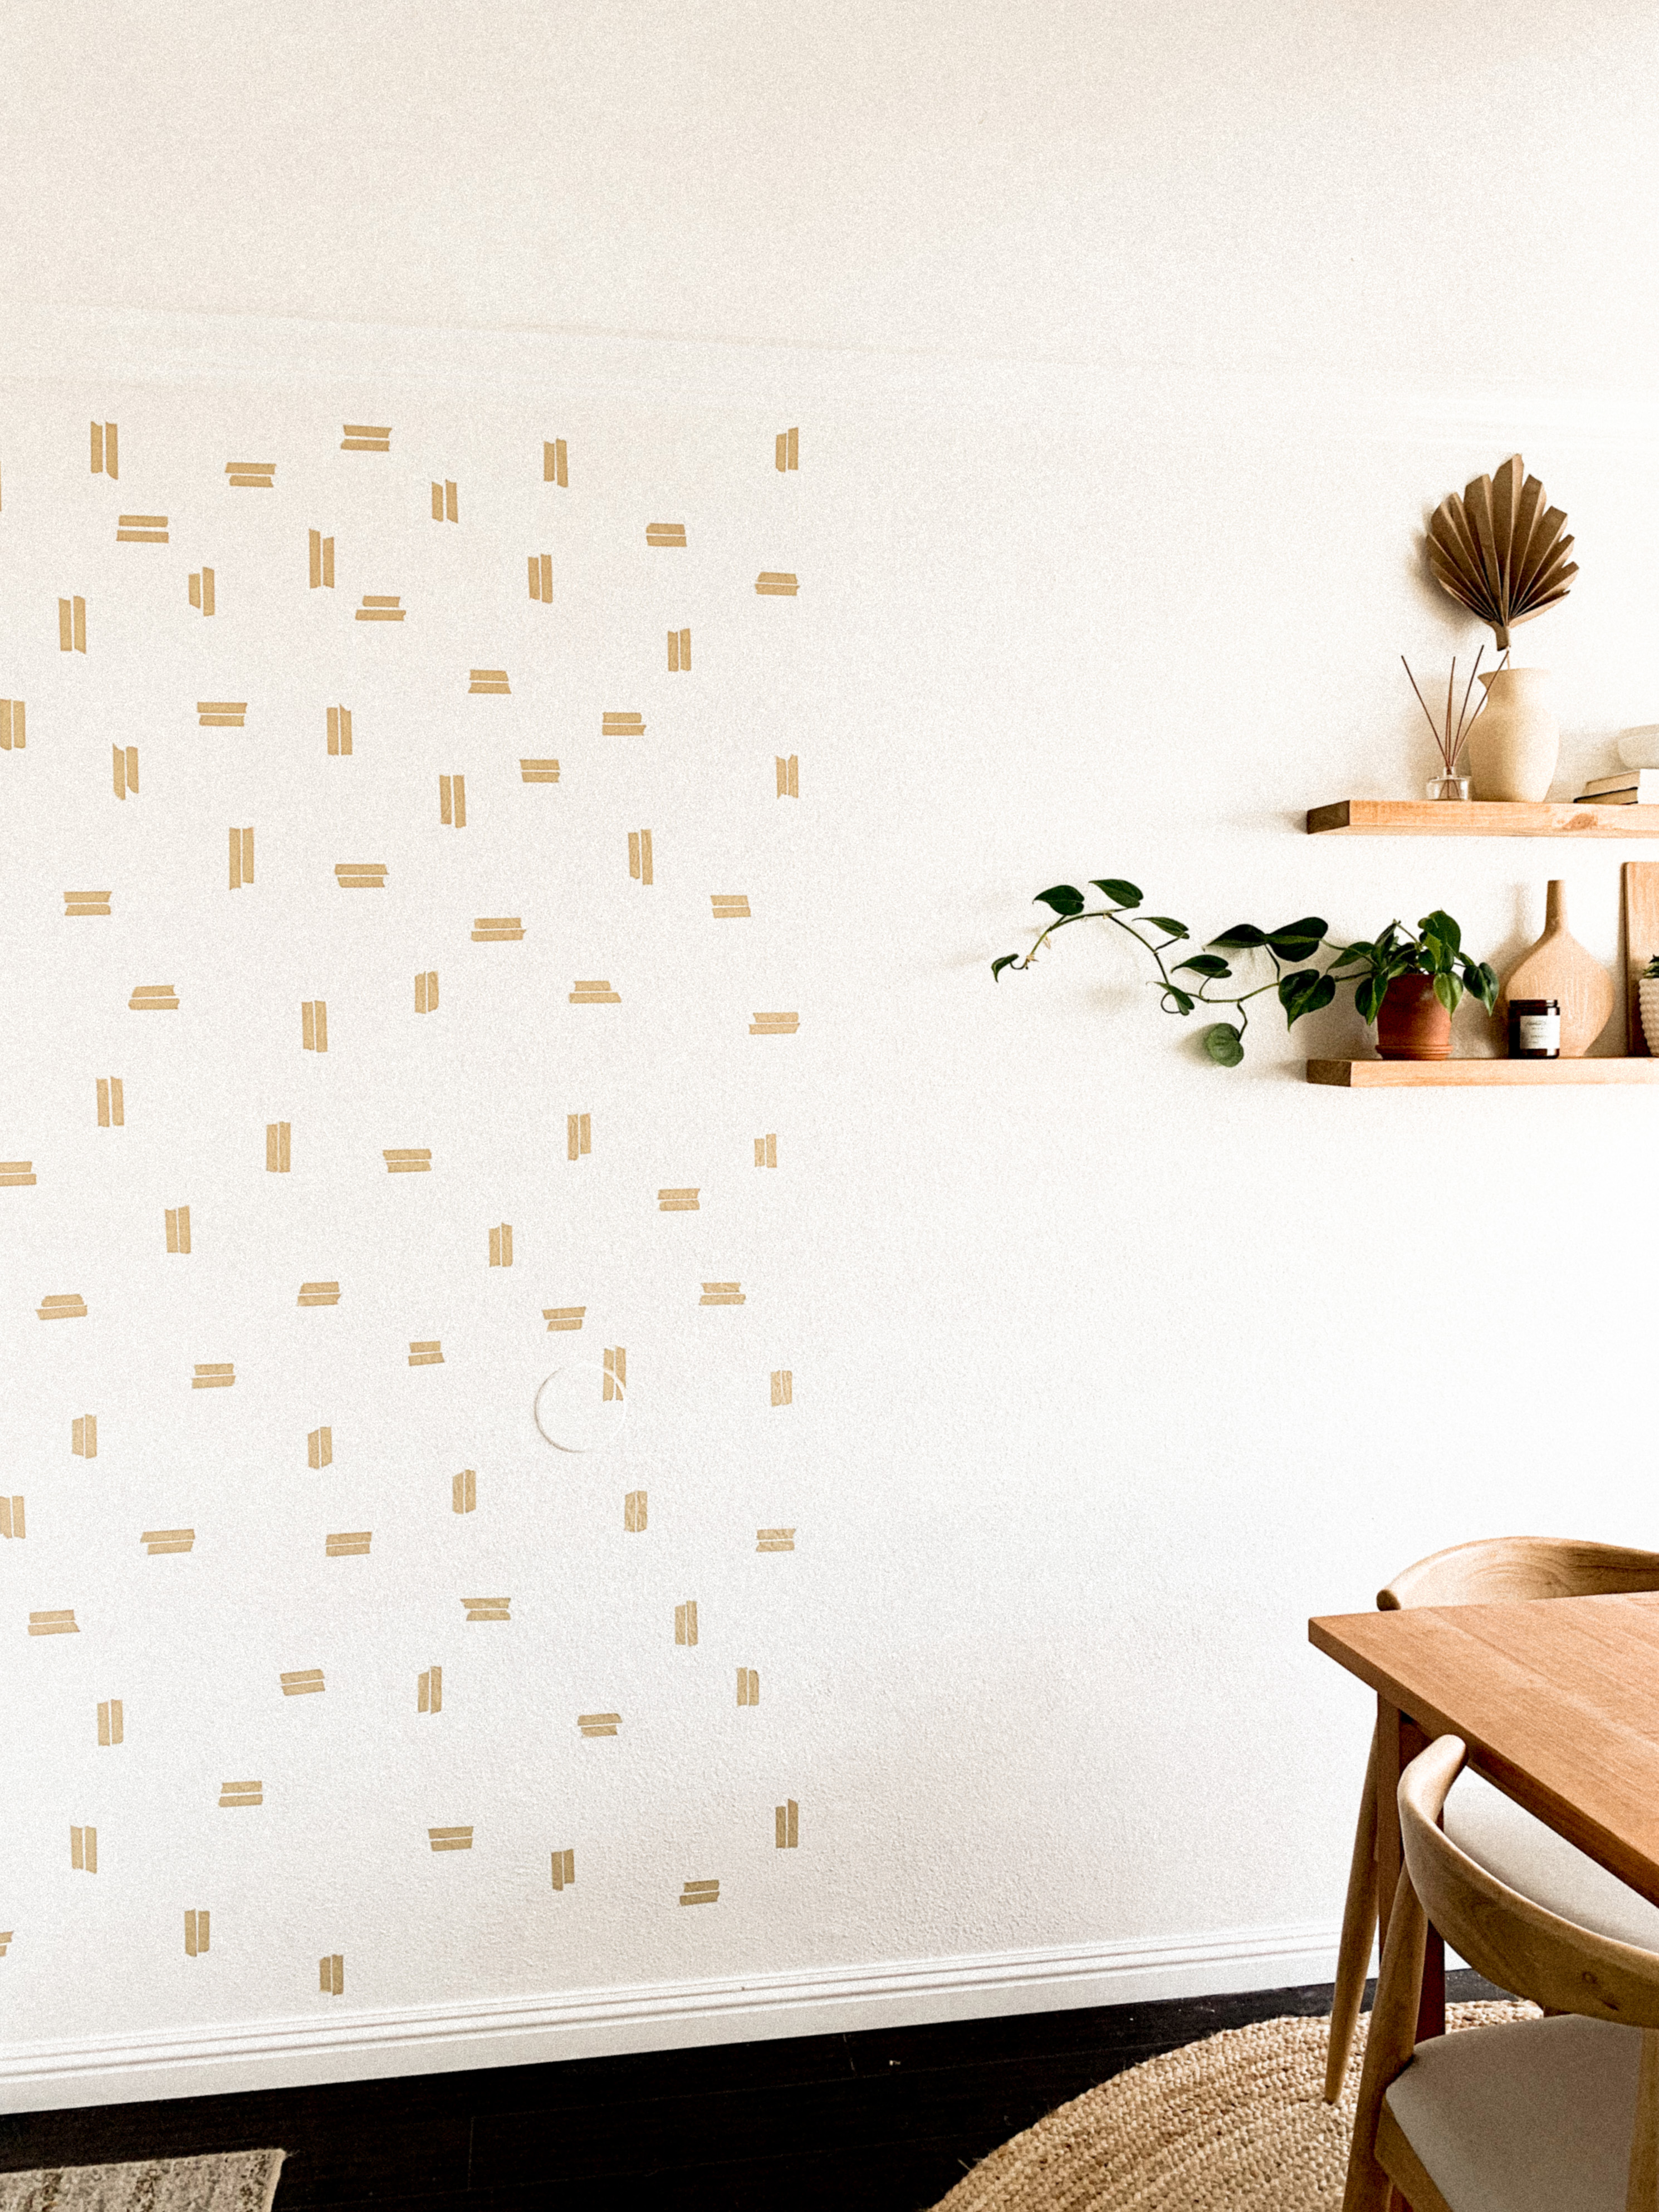 Medium shot of washi tape wall next to dining area. Washi tape walls help create separation and dimension.